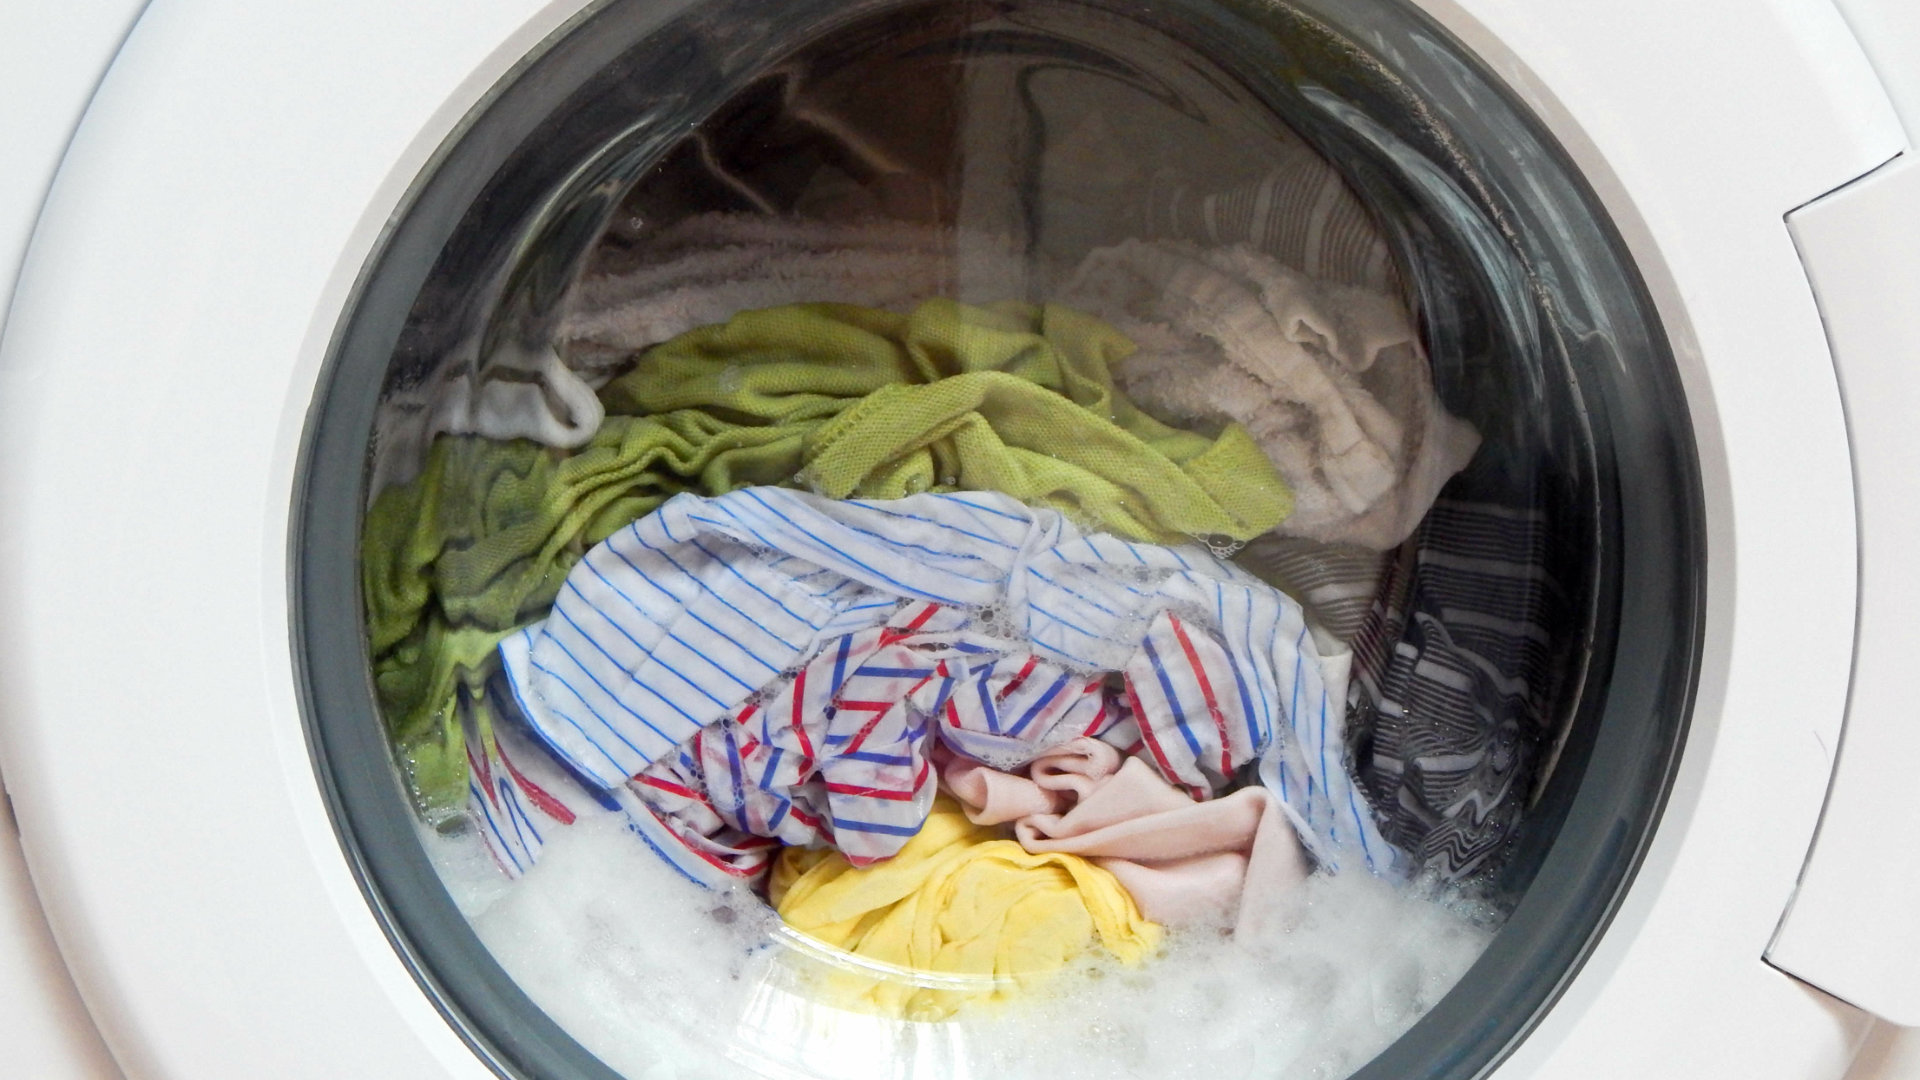 Featured image for “Clothes Still Wet After Spin Cycle? Here’s What to Do”